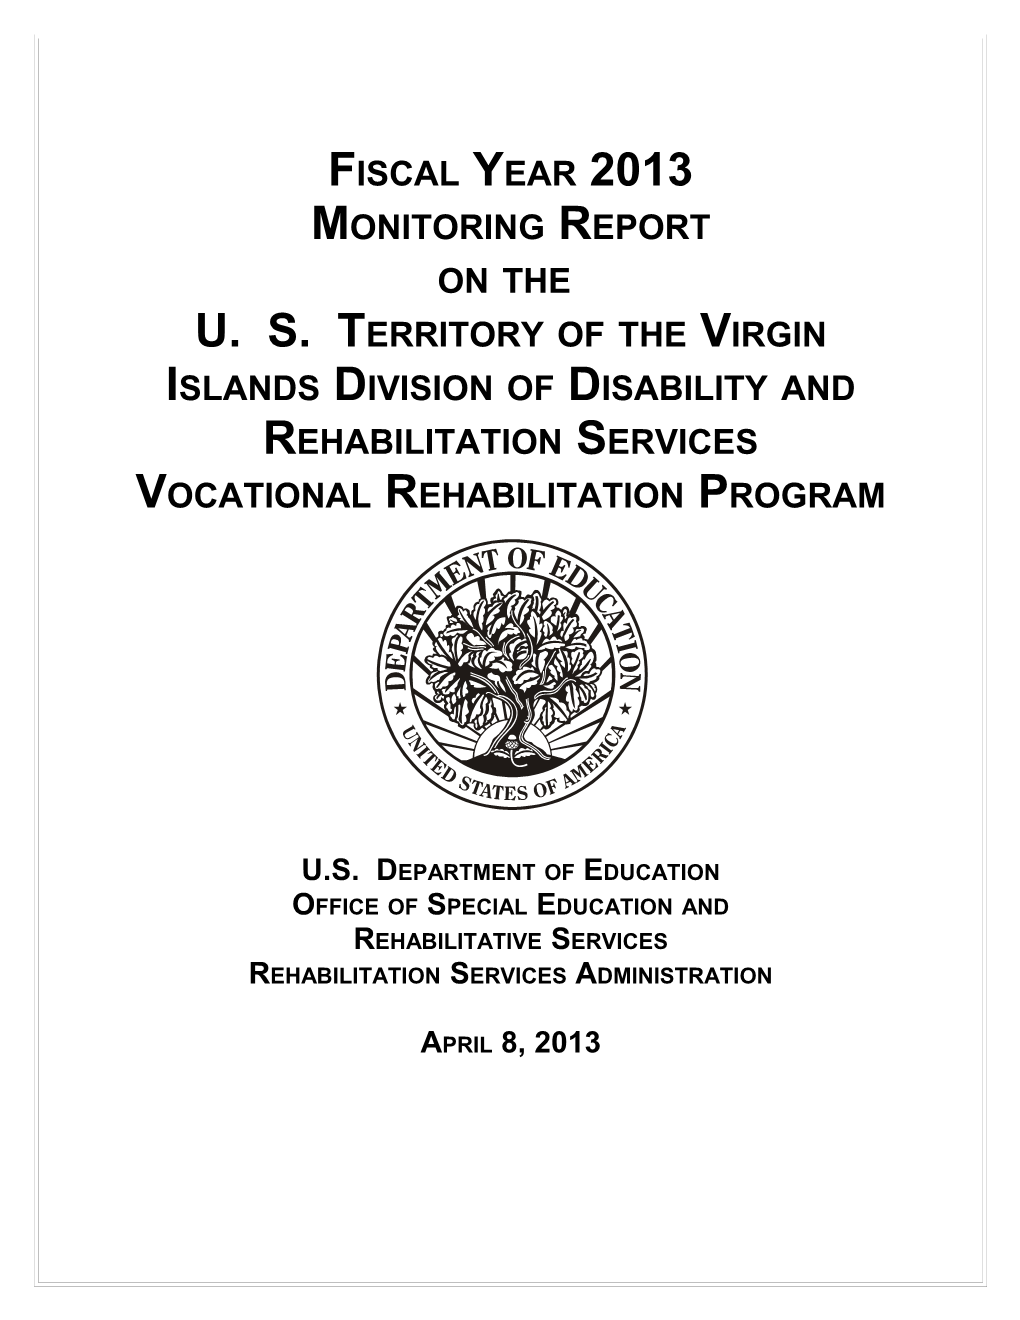 Fiscal Year 2013 Monitoring Report on the U. S. Territory of the Virgin Islands Division